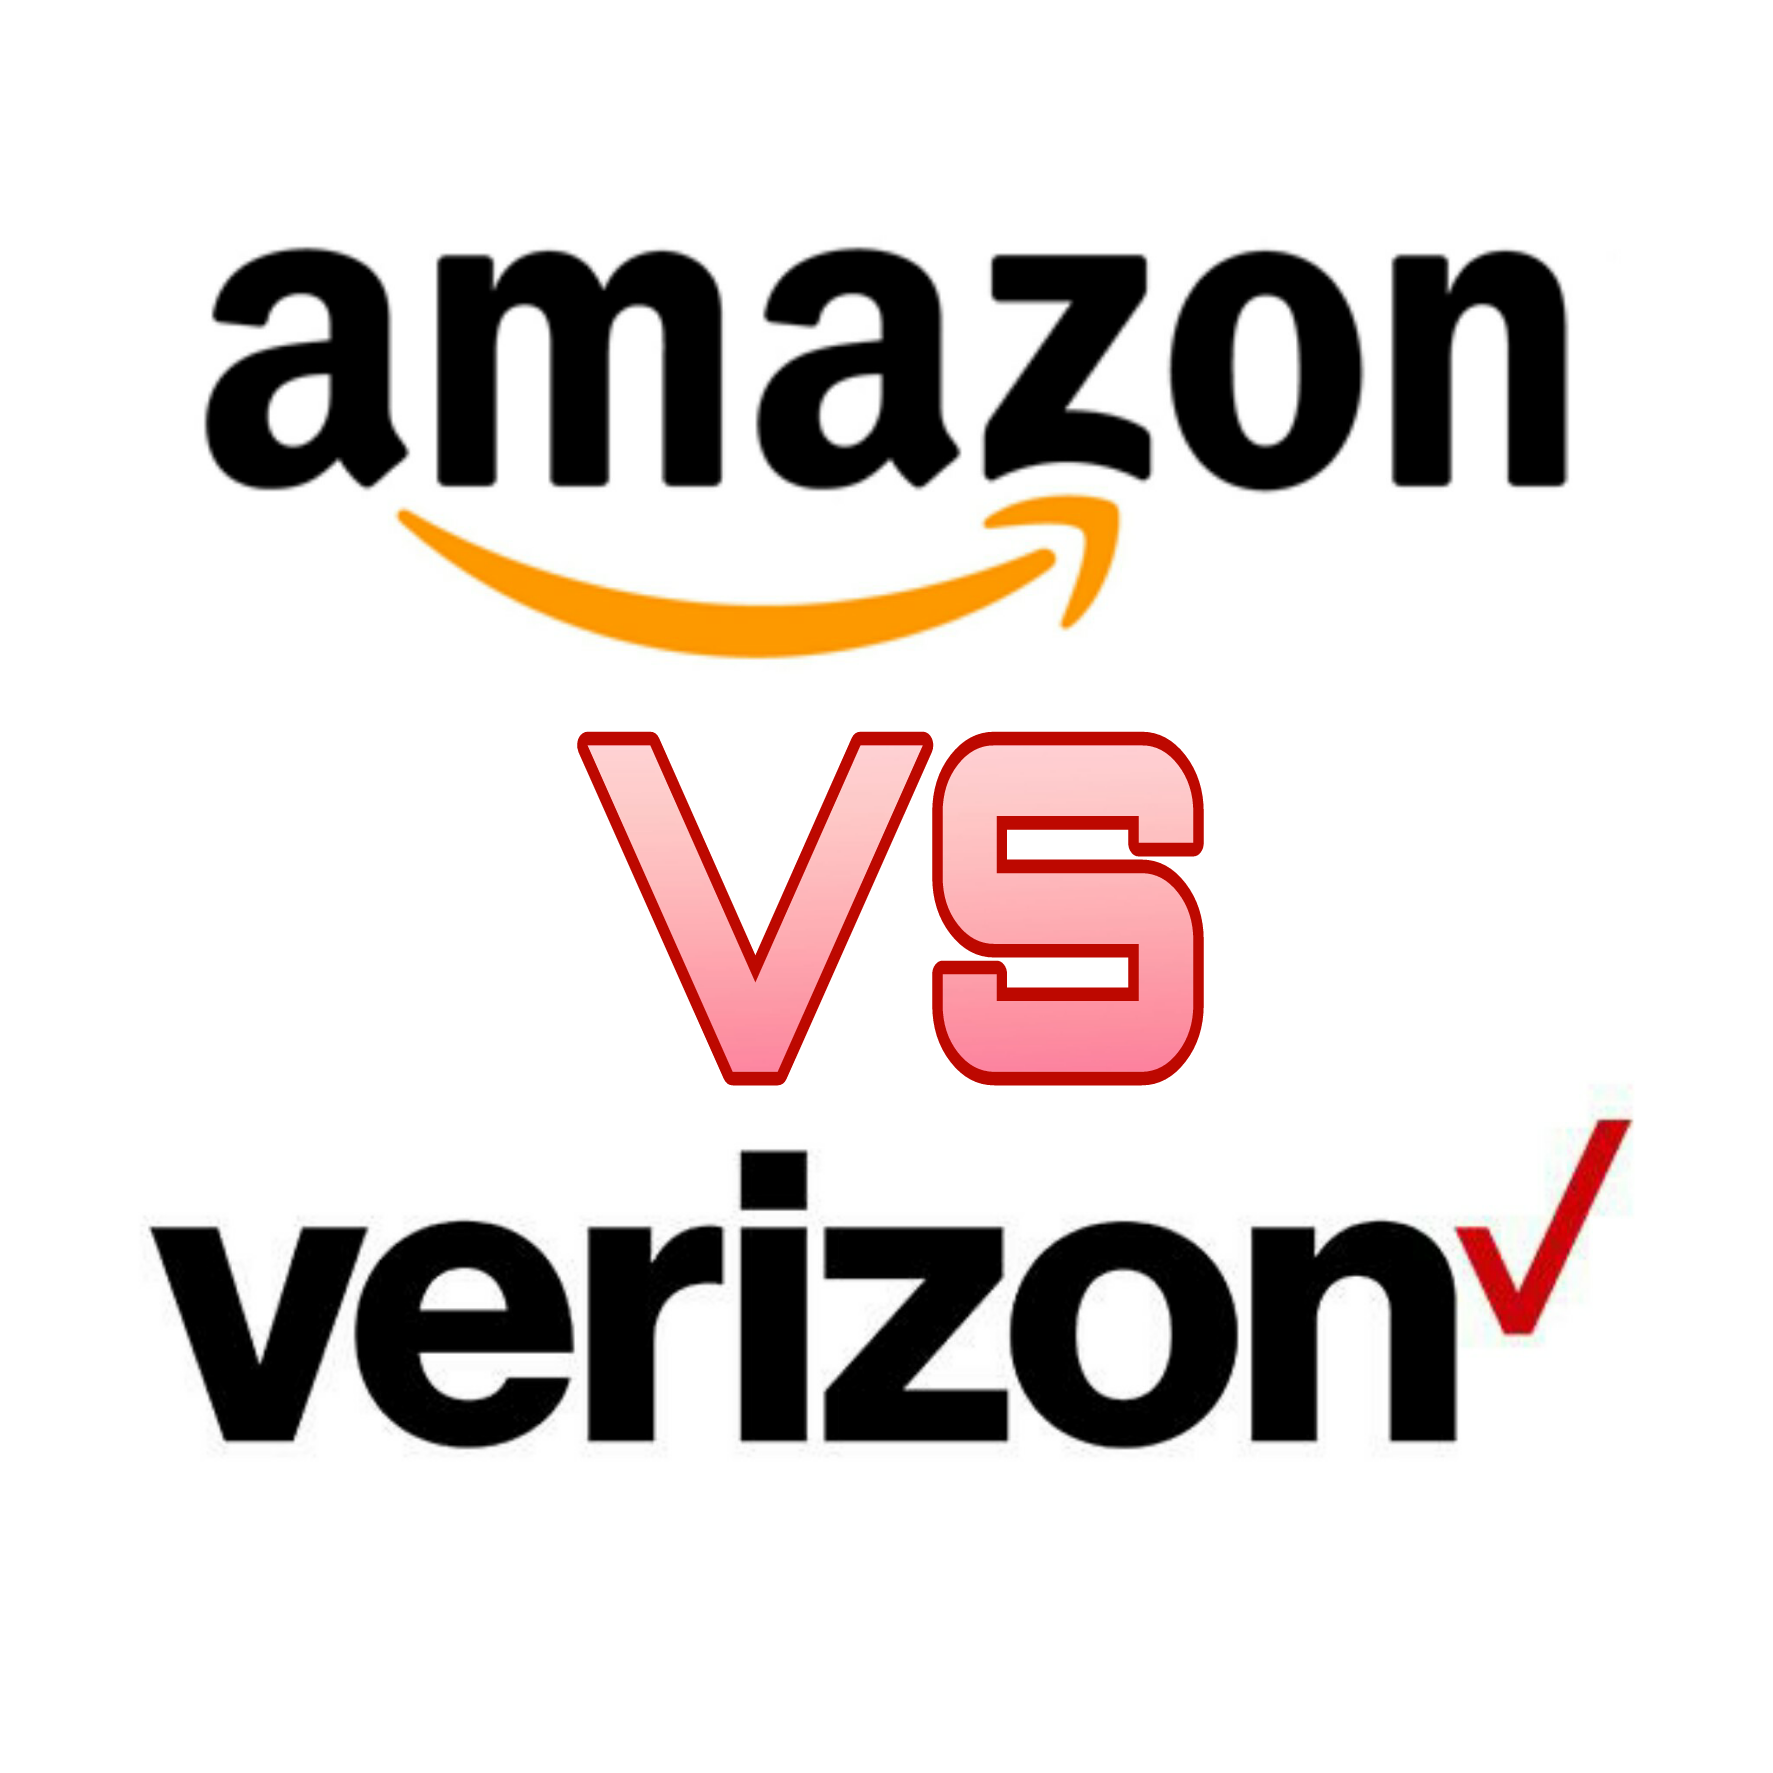 Amazon and Verizon are developing mobile game streaming services